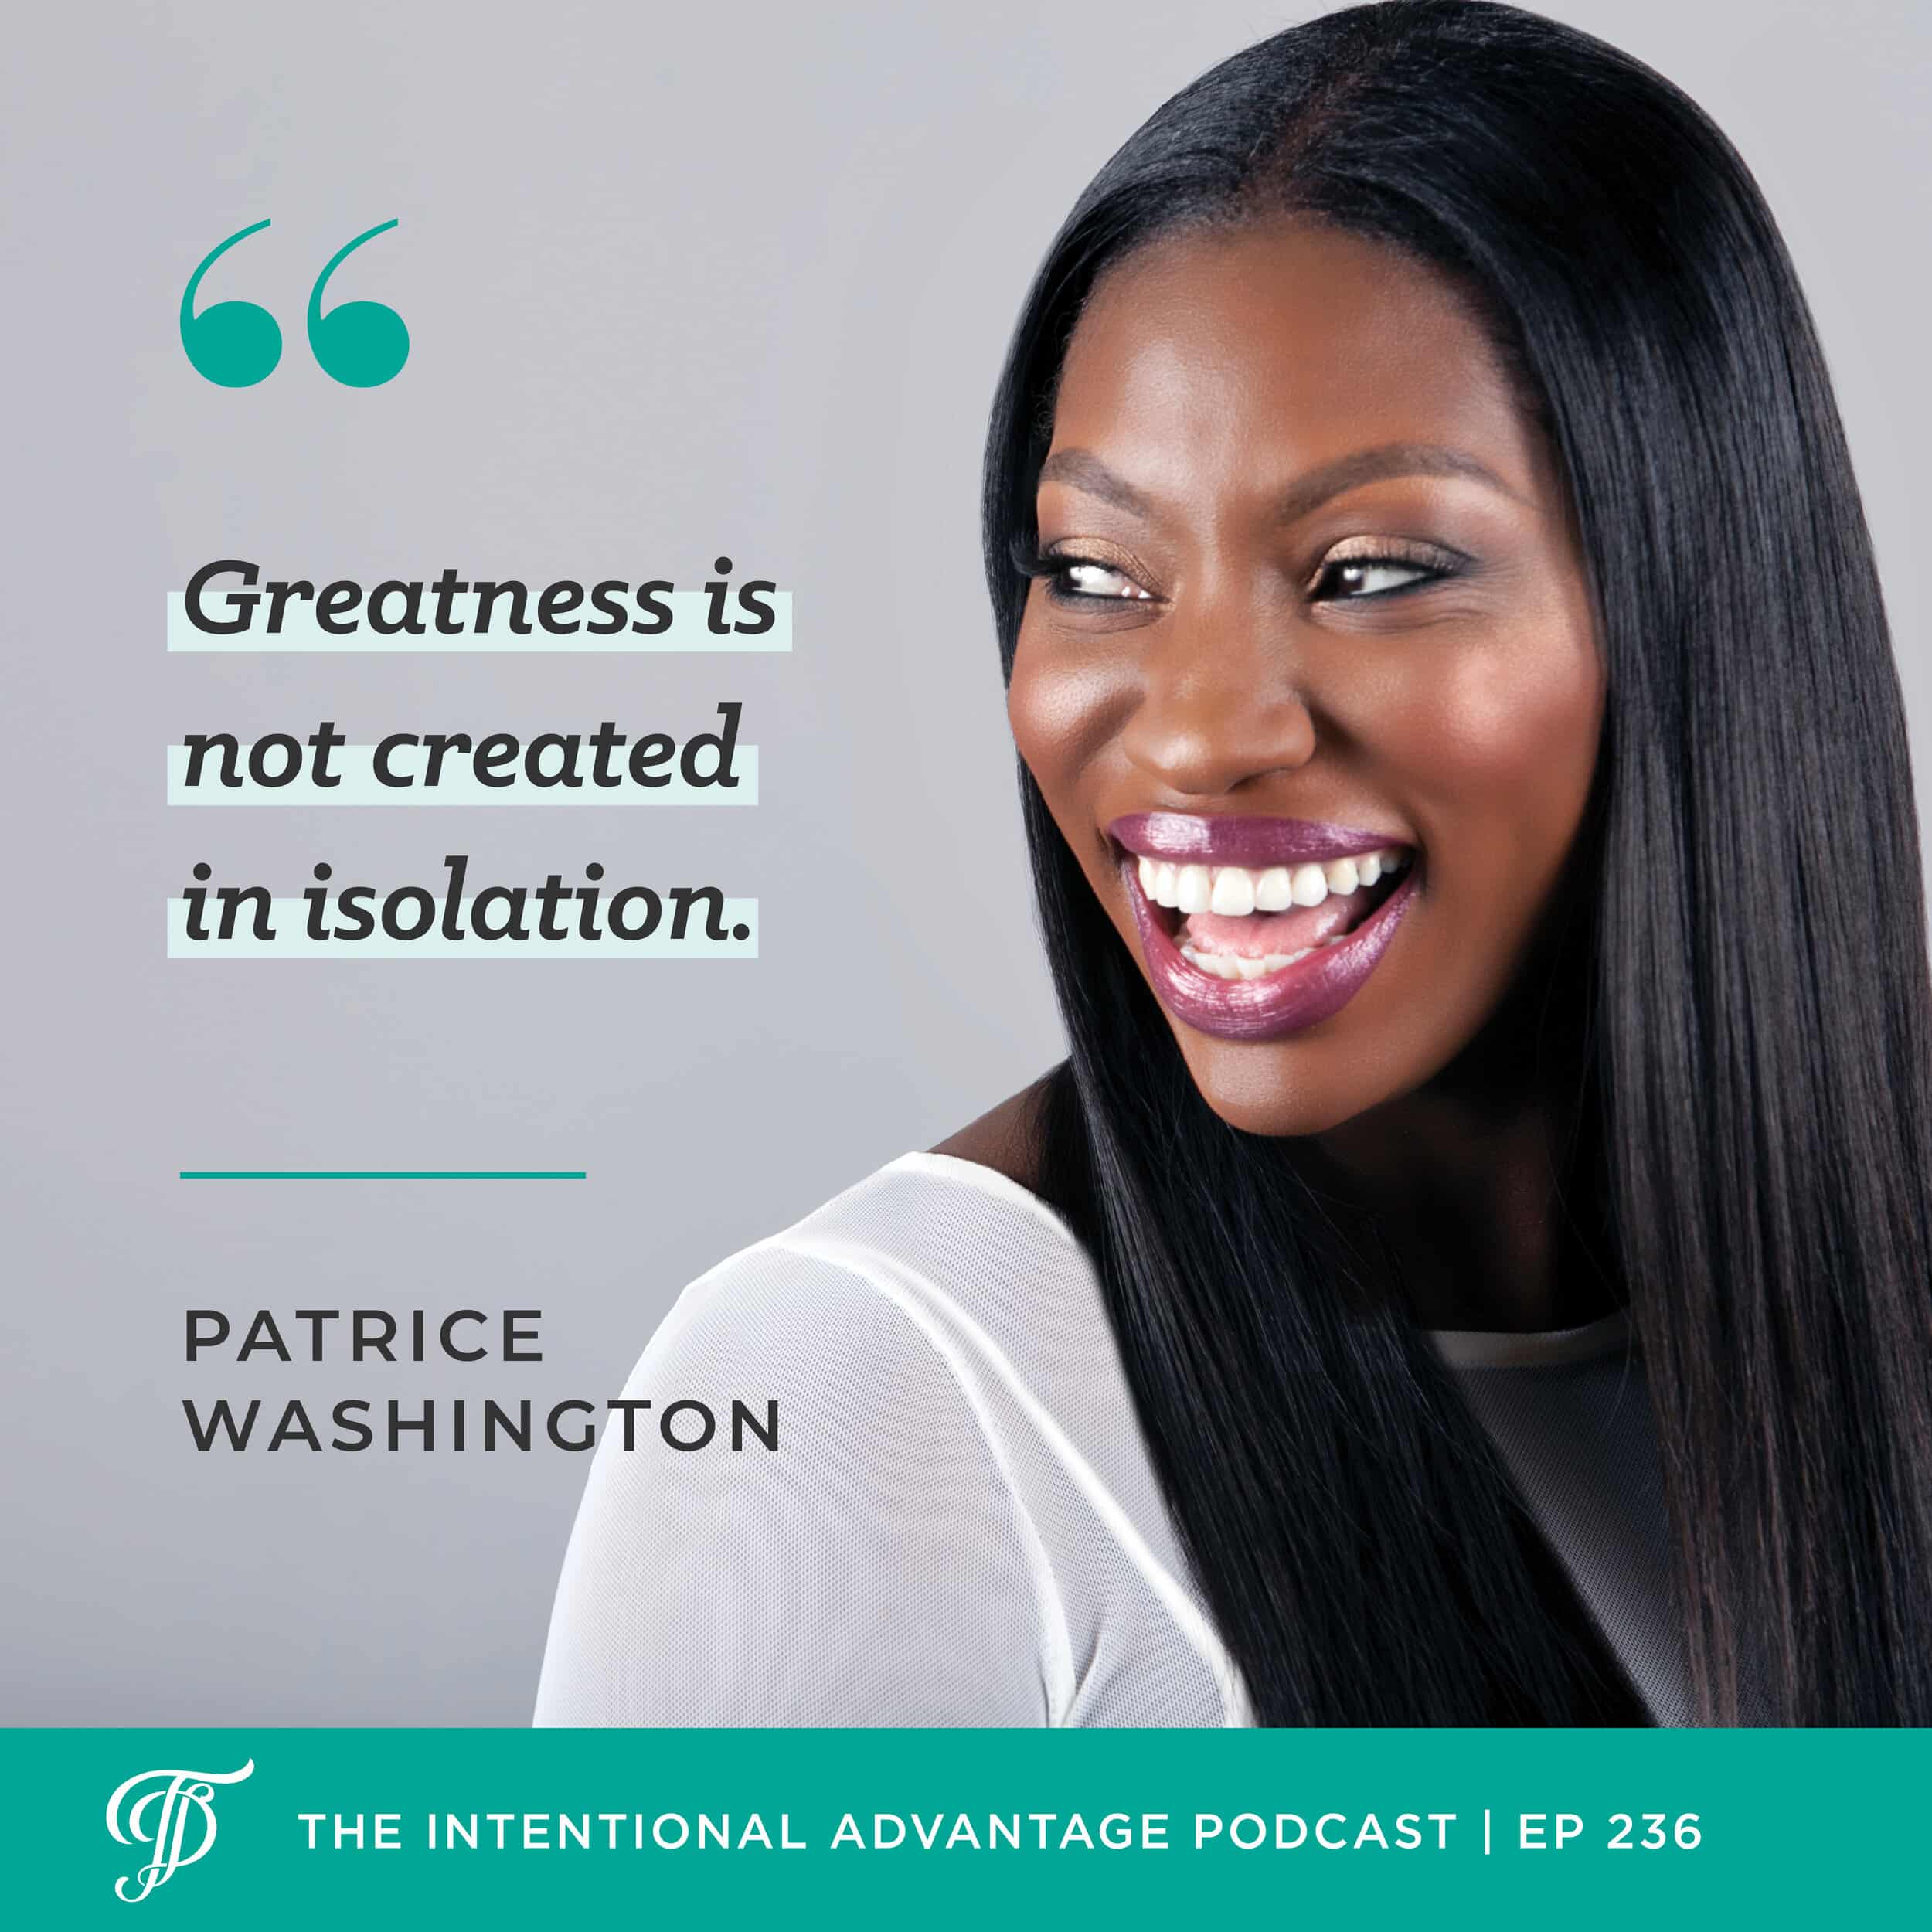 Patrice Washington podcast interview on The Intentional Advantage